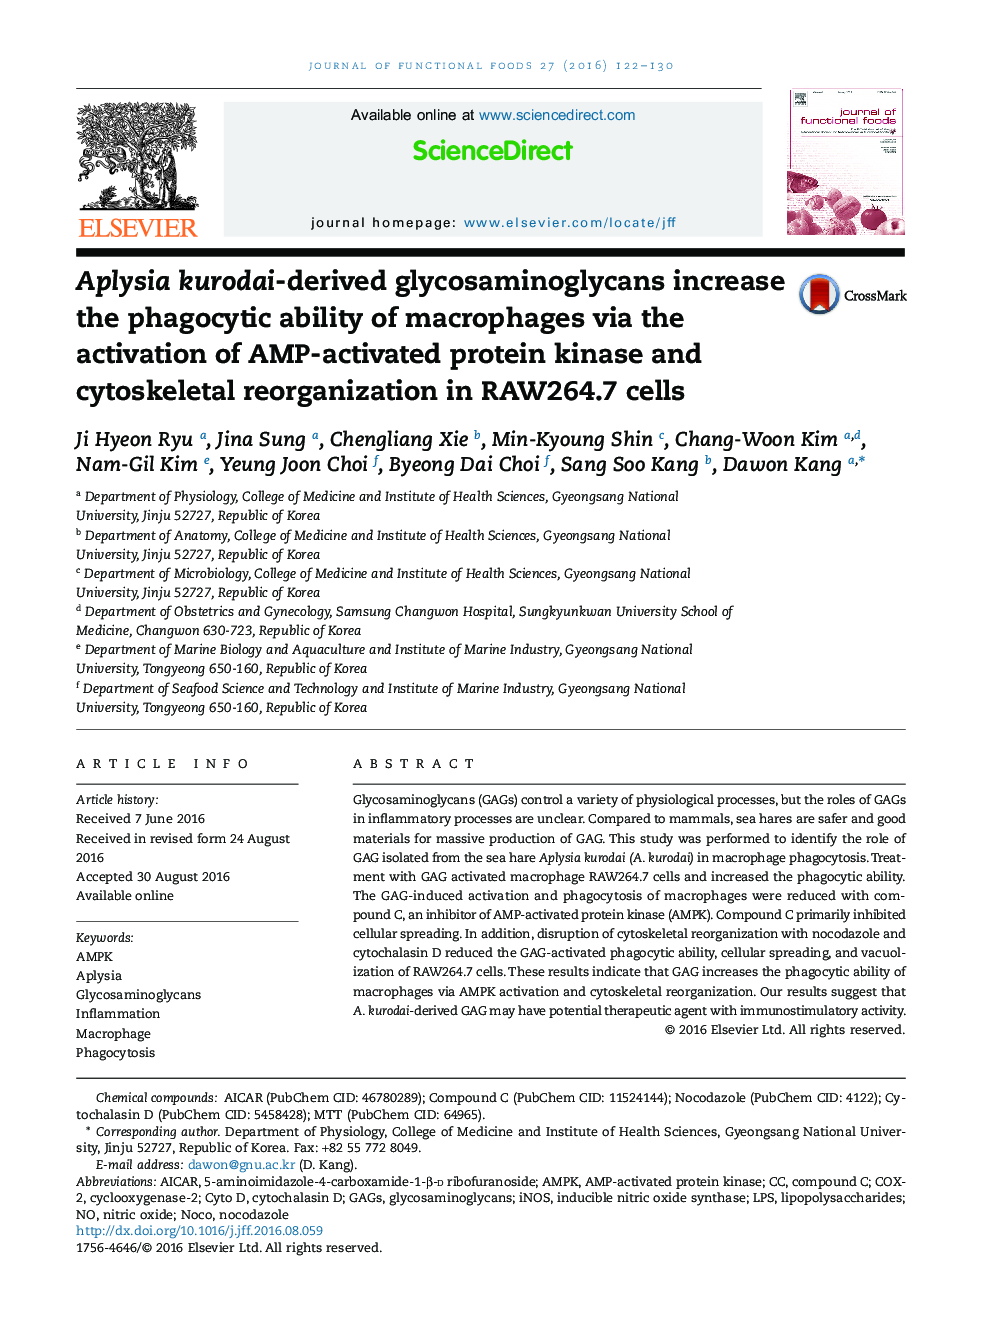 Aplysia kurodai-derived glycosaminoglycans increase the phagocytic ability of macrophages via the activation of AMP-activated protein kinase and cytoskeletal reorganization in RAW264.7 cells